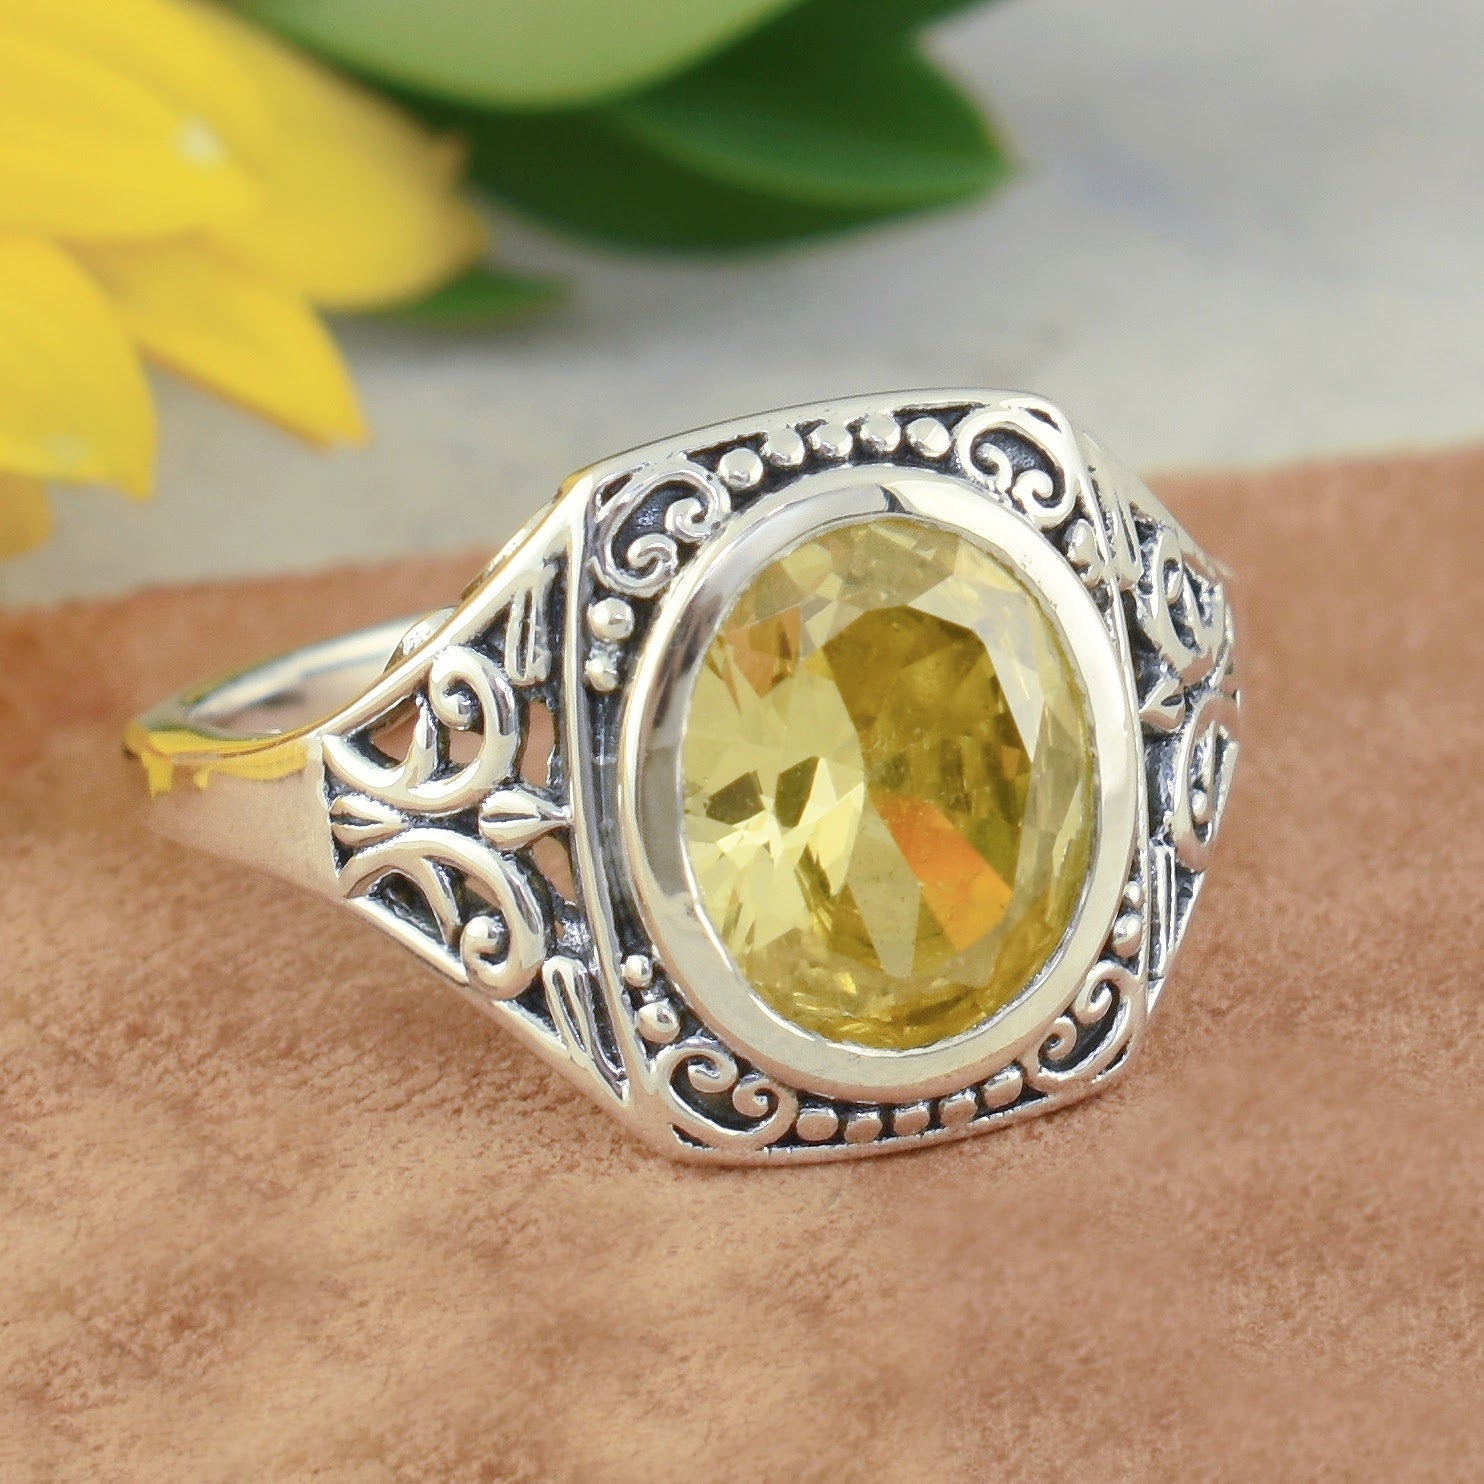 chunky sterling silver ring with filigree detail and yellow cz stone